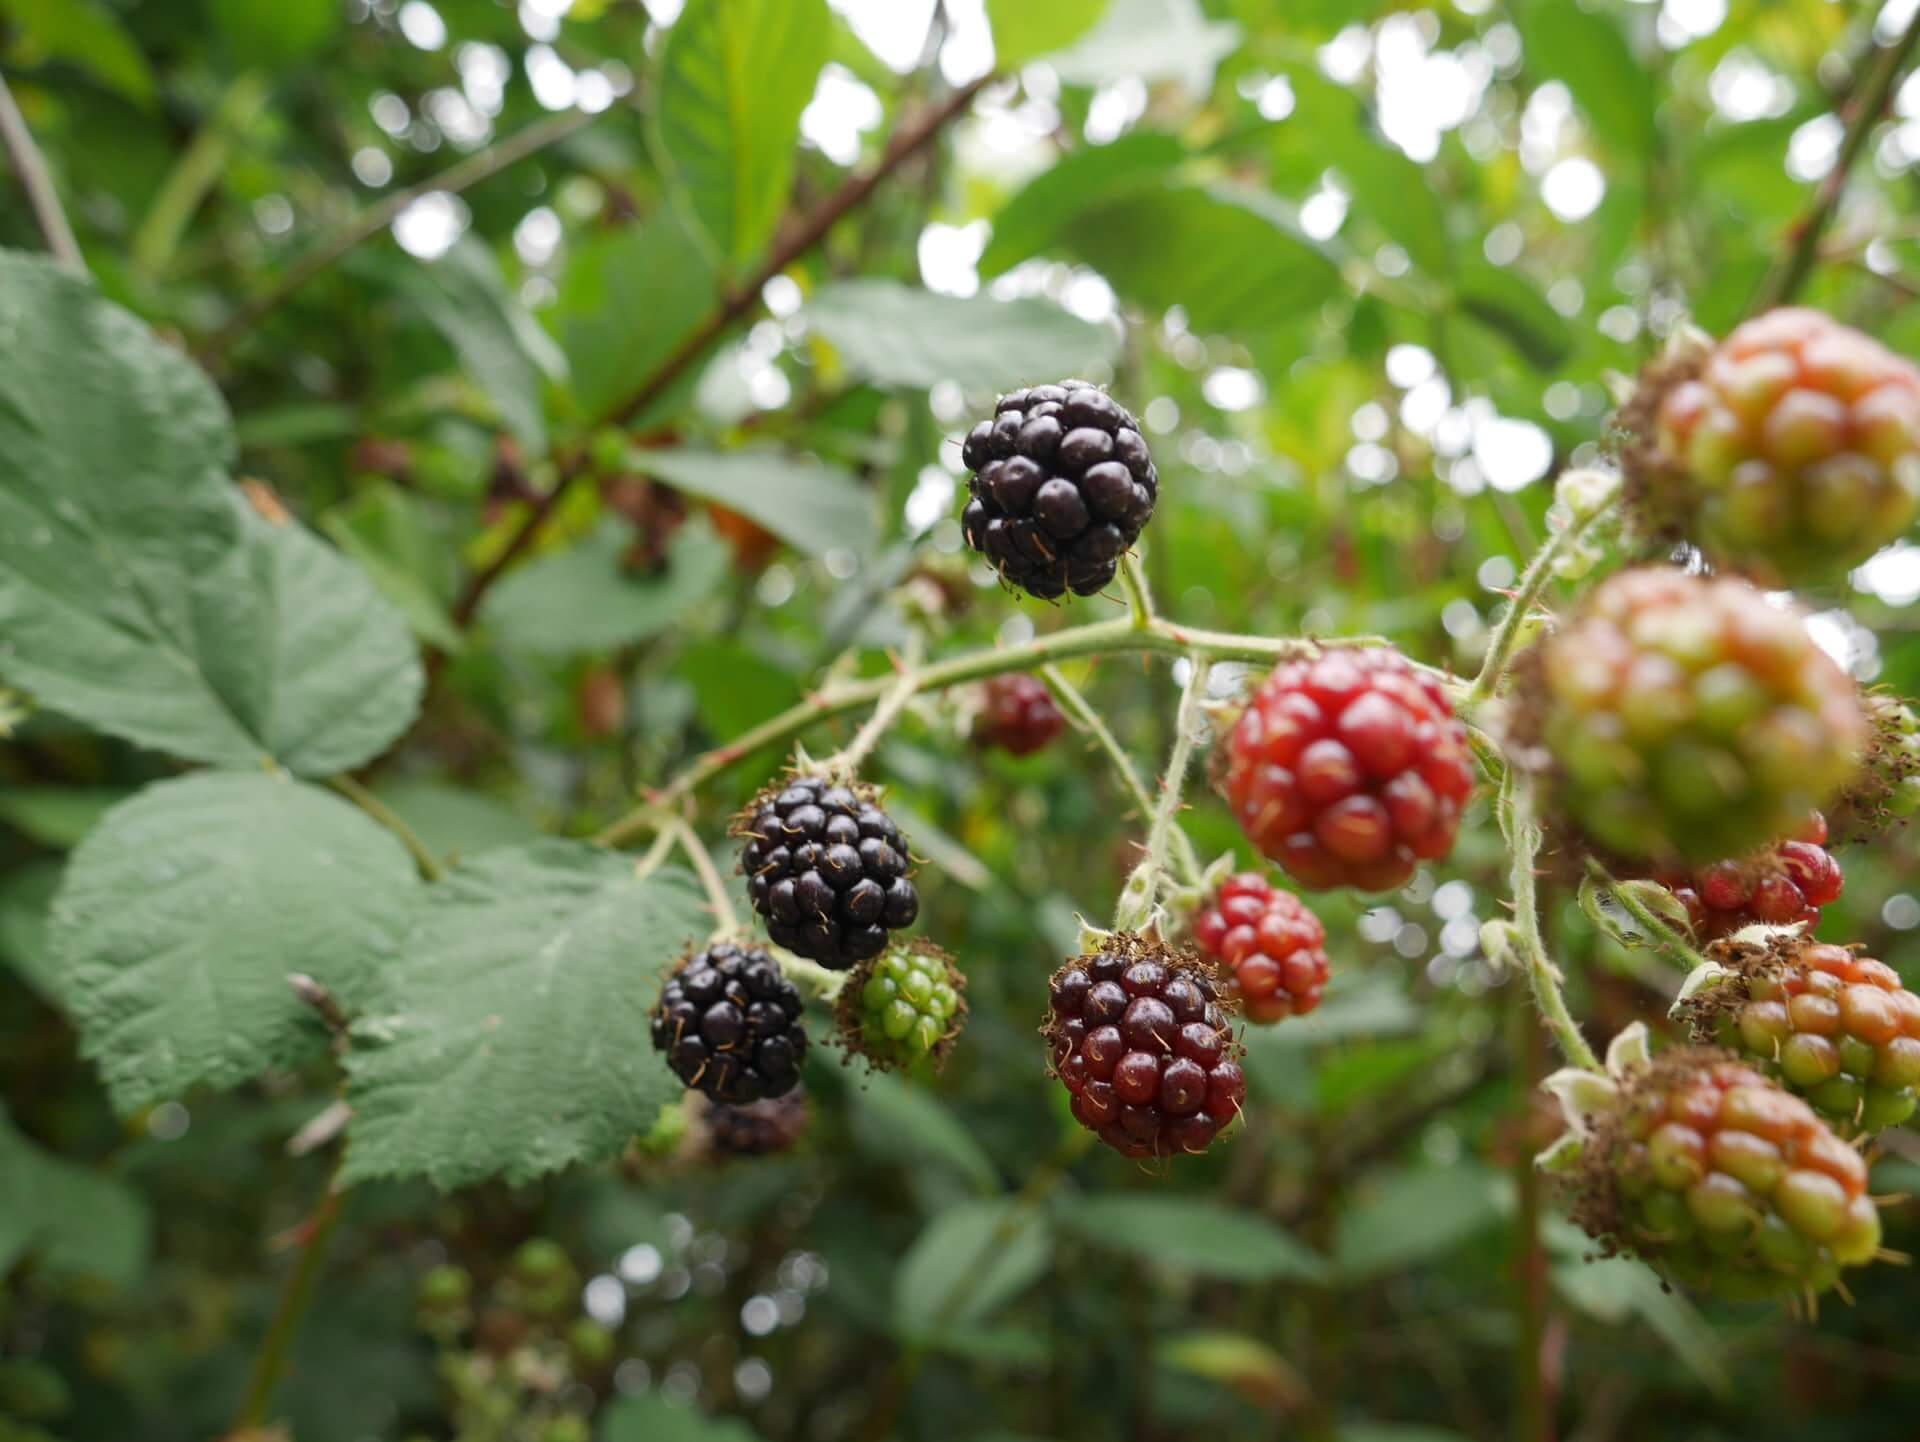 A mixture of black, deep red and green blackberries still on the bush.